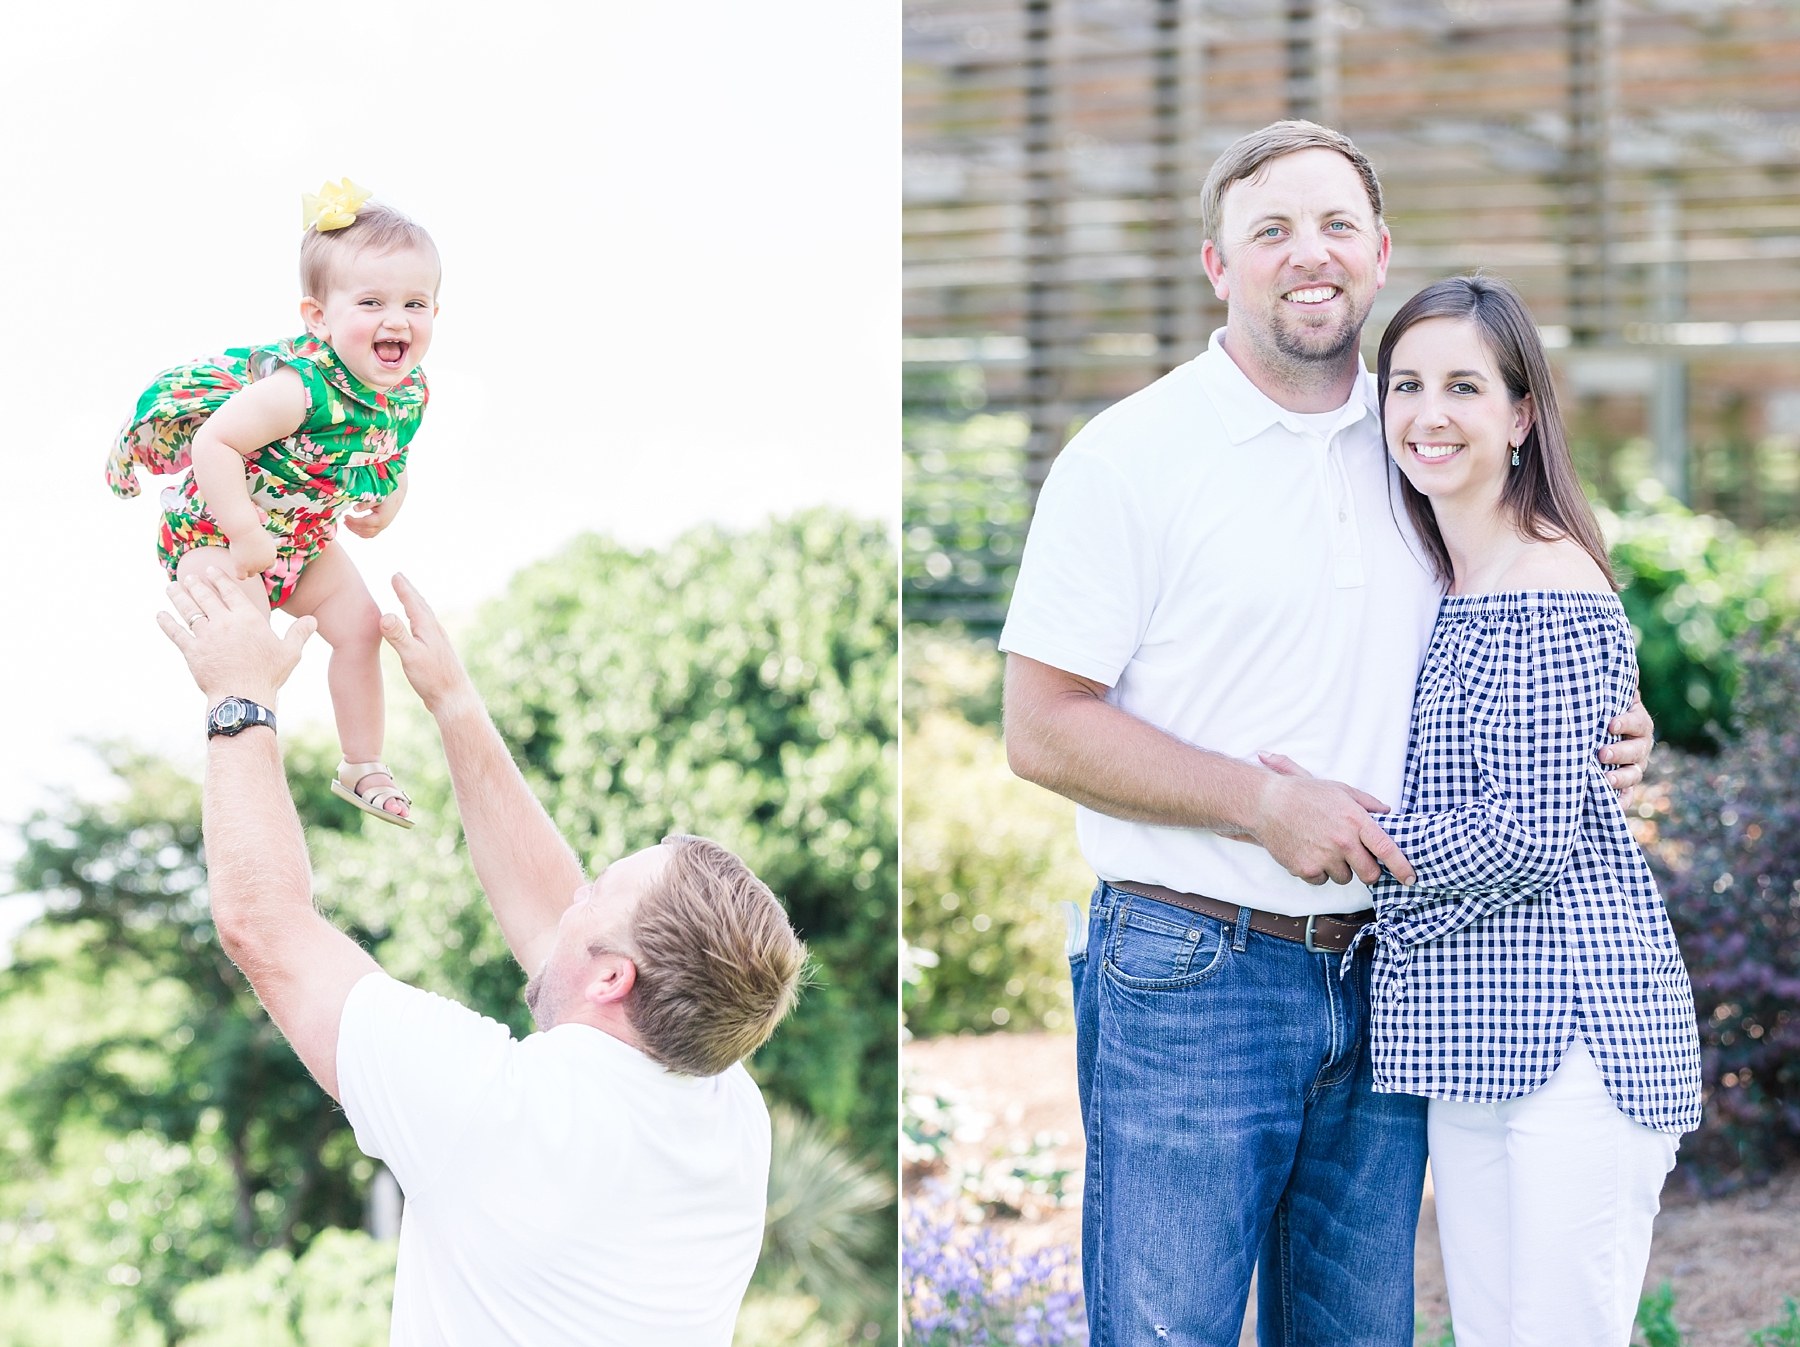 Family photographer in Raleigh, NC | Traci Huffman Photography | Farrell Family Sneak Previews_0007.jpg